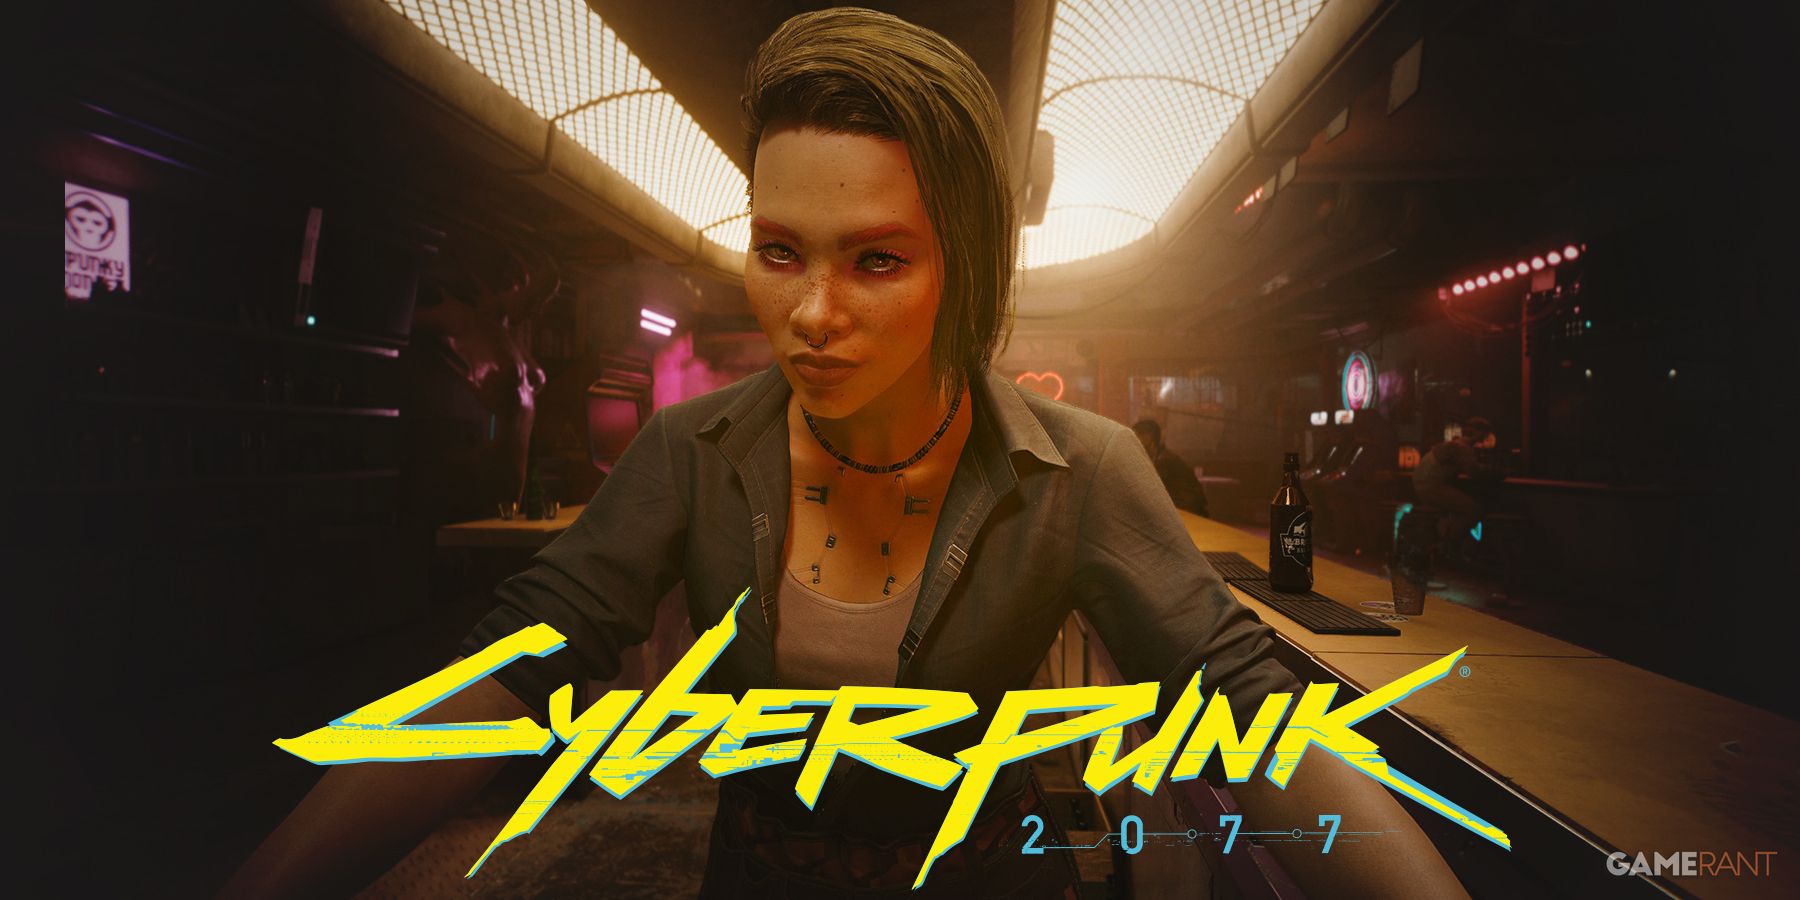 COVER ONLY Cyberpunk 2077 ULTIMATE EDITION PS5 NO GAME